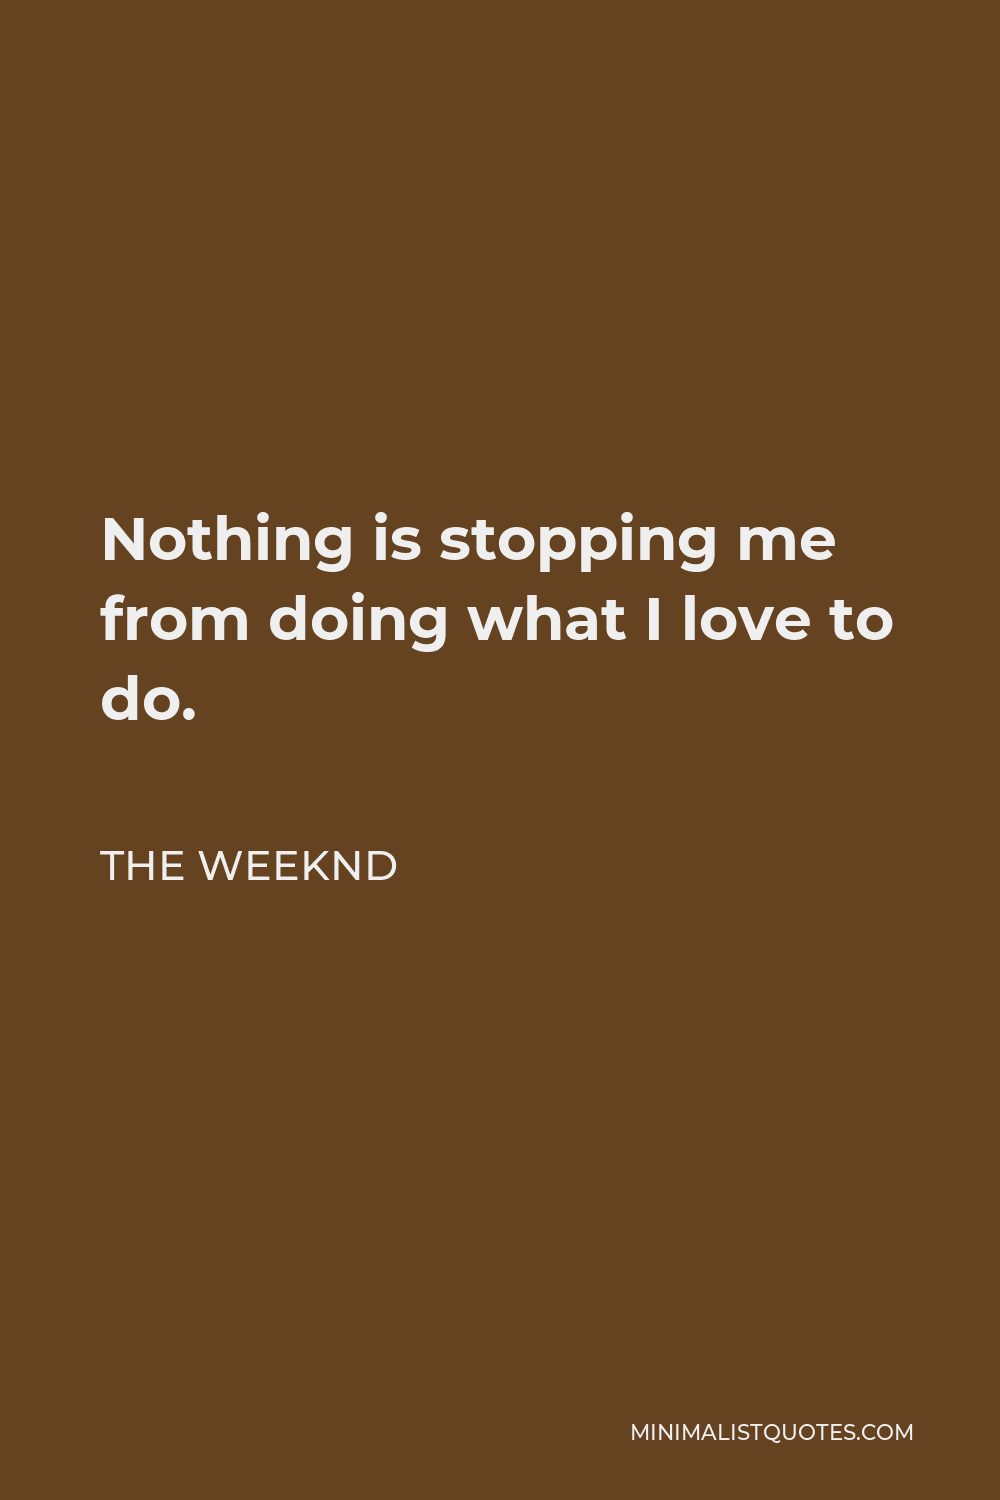 The Weeknd Quote - Nothing is stopping me from doing what I love to do.